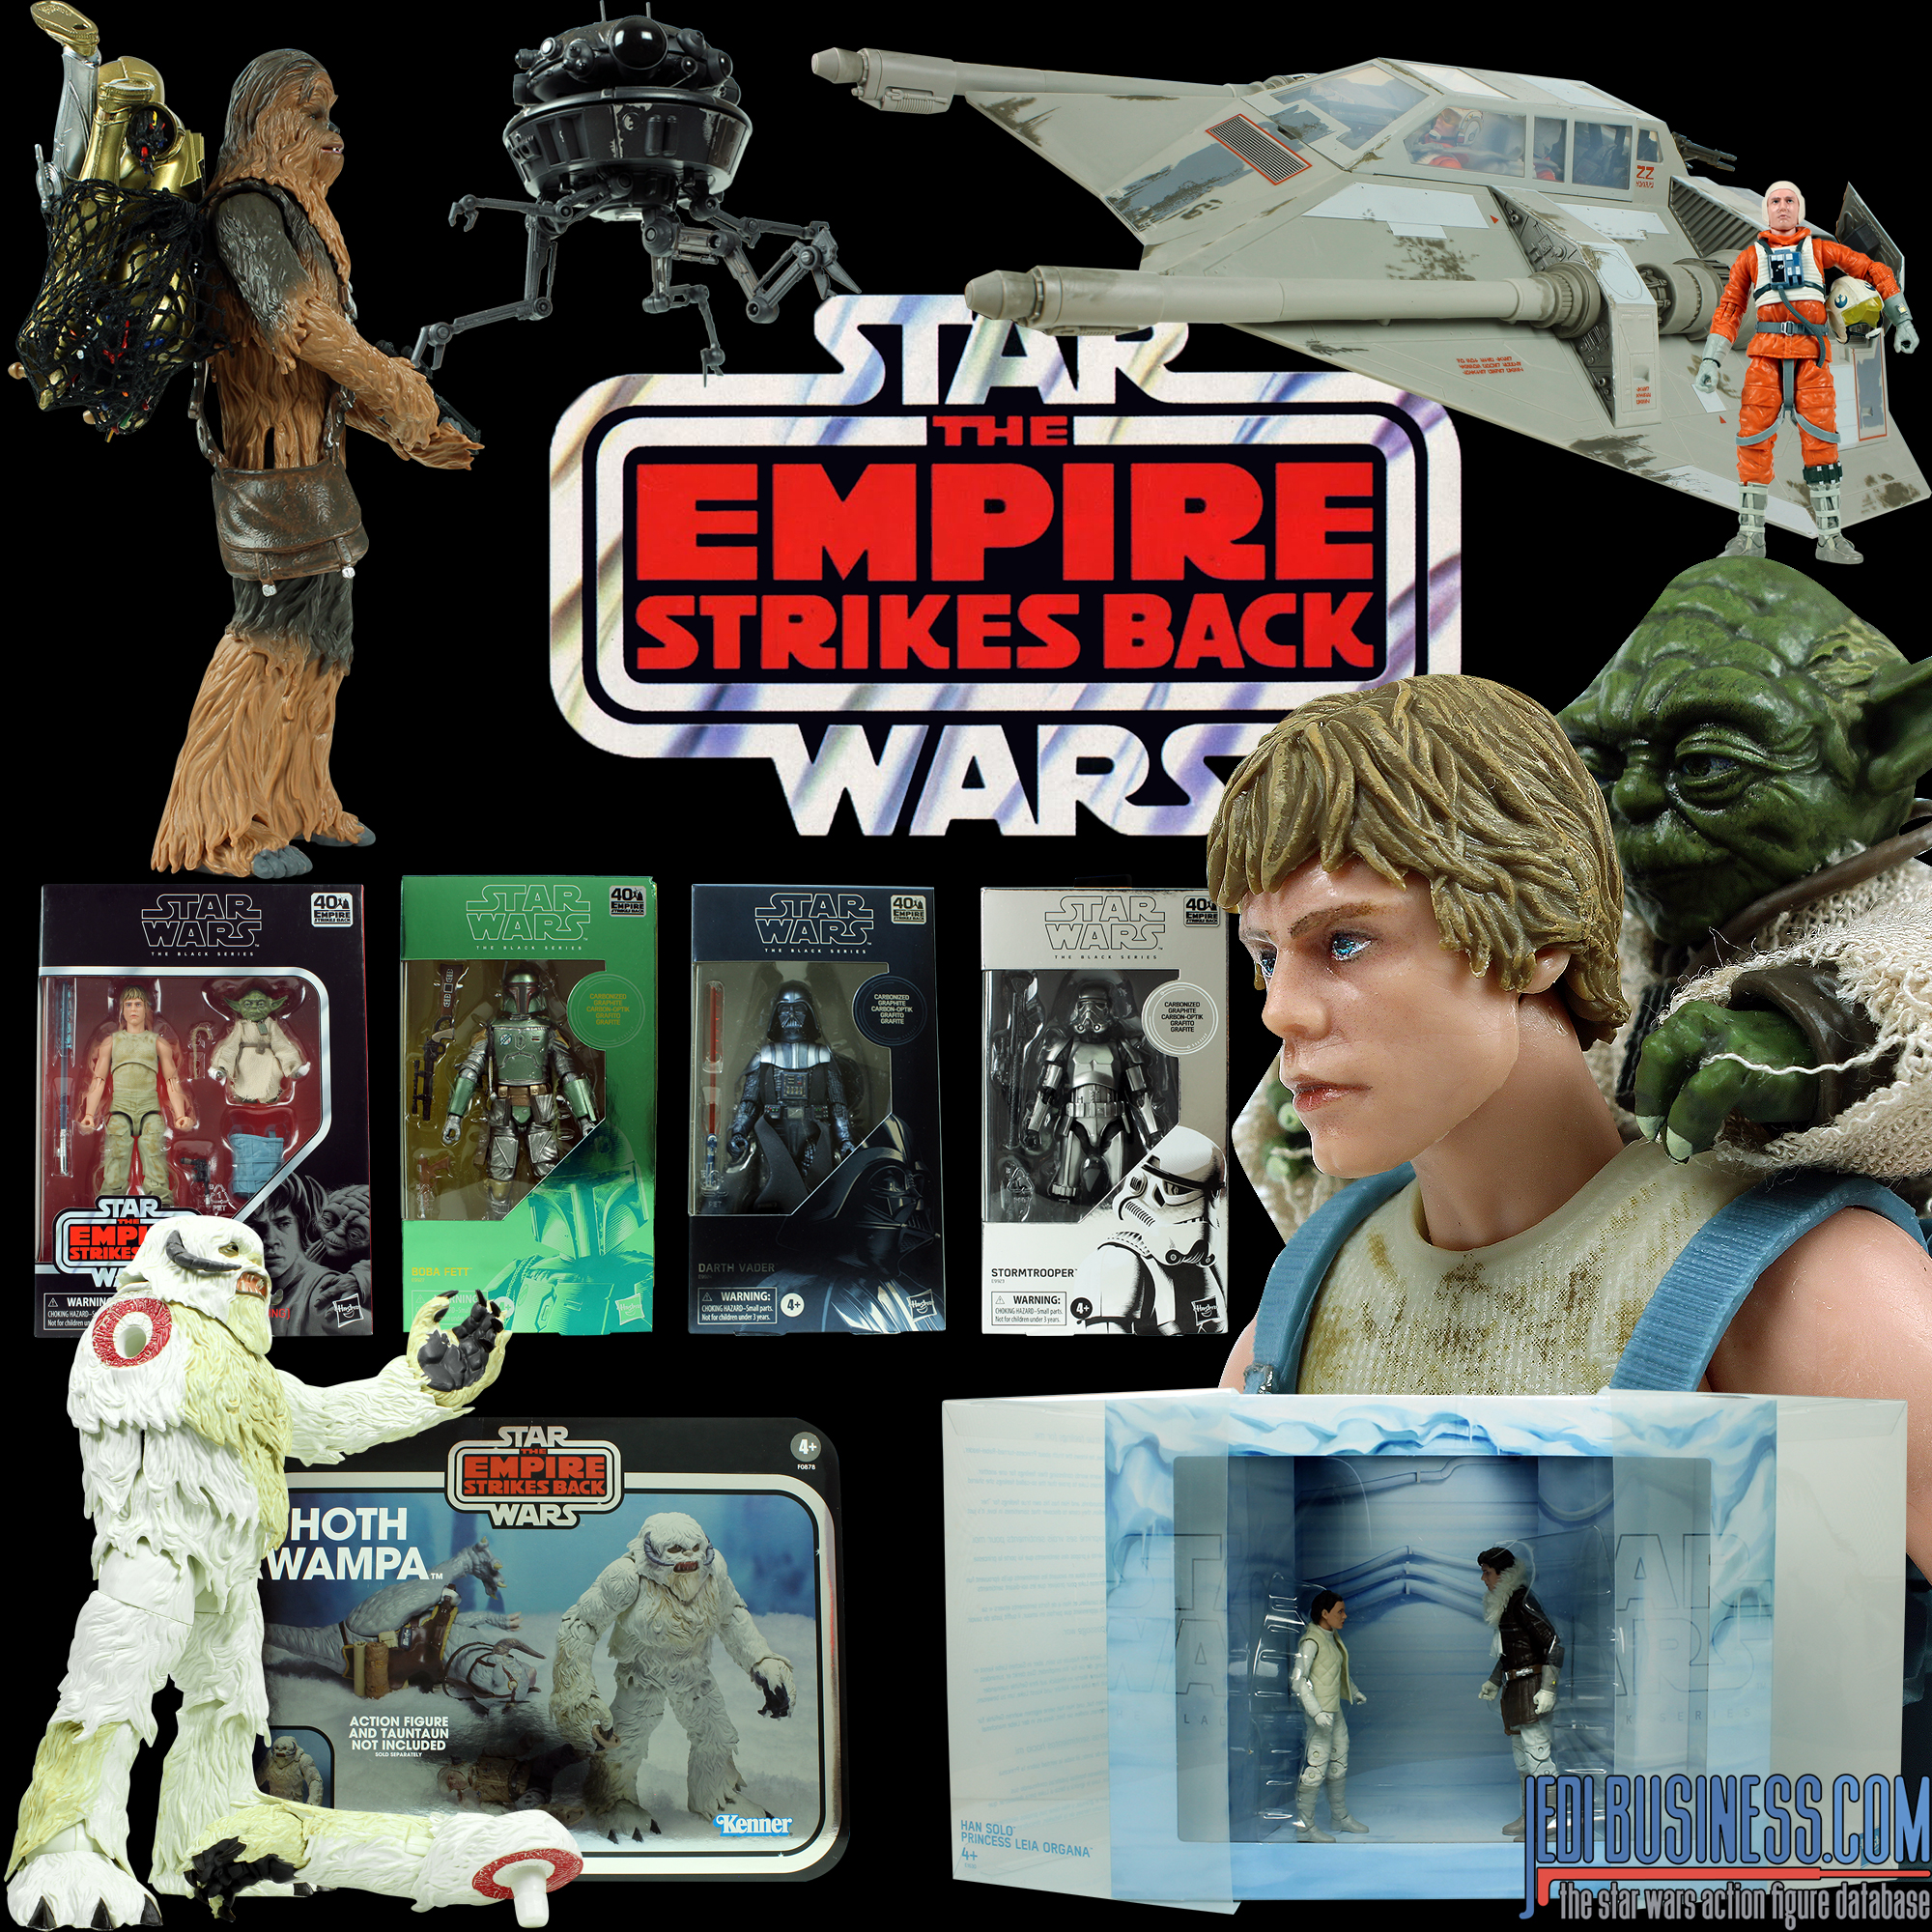 The Empire Strikes Back 40th Anniversary Kenner